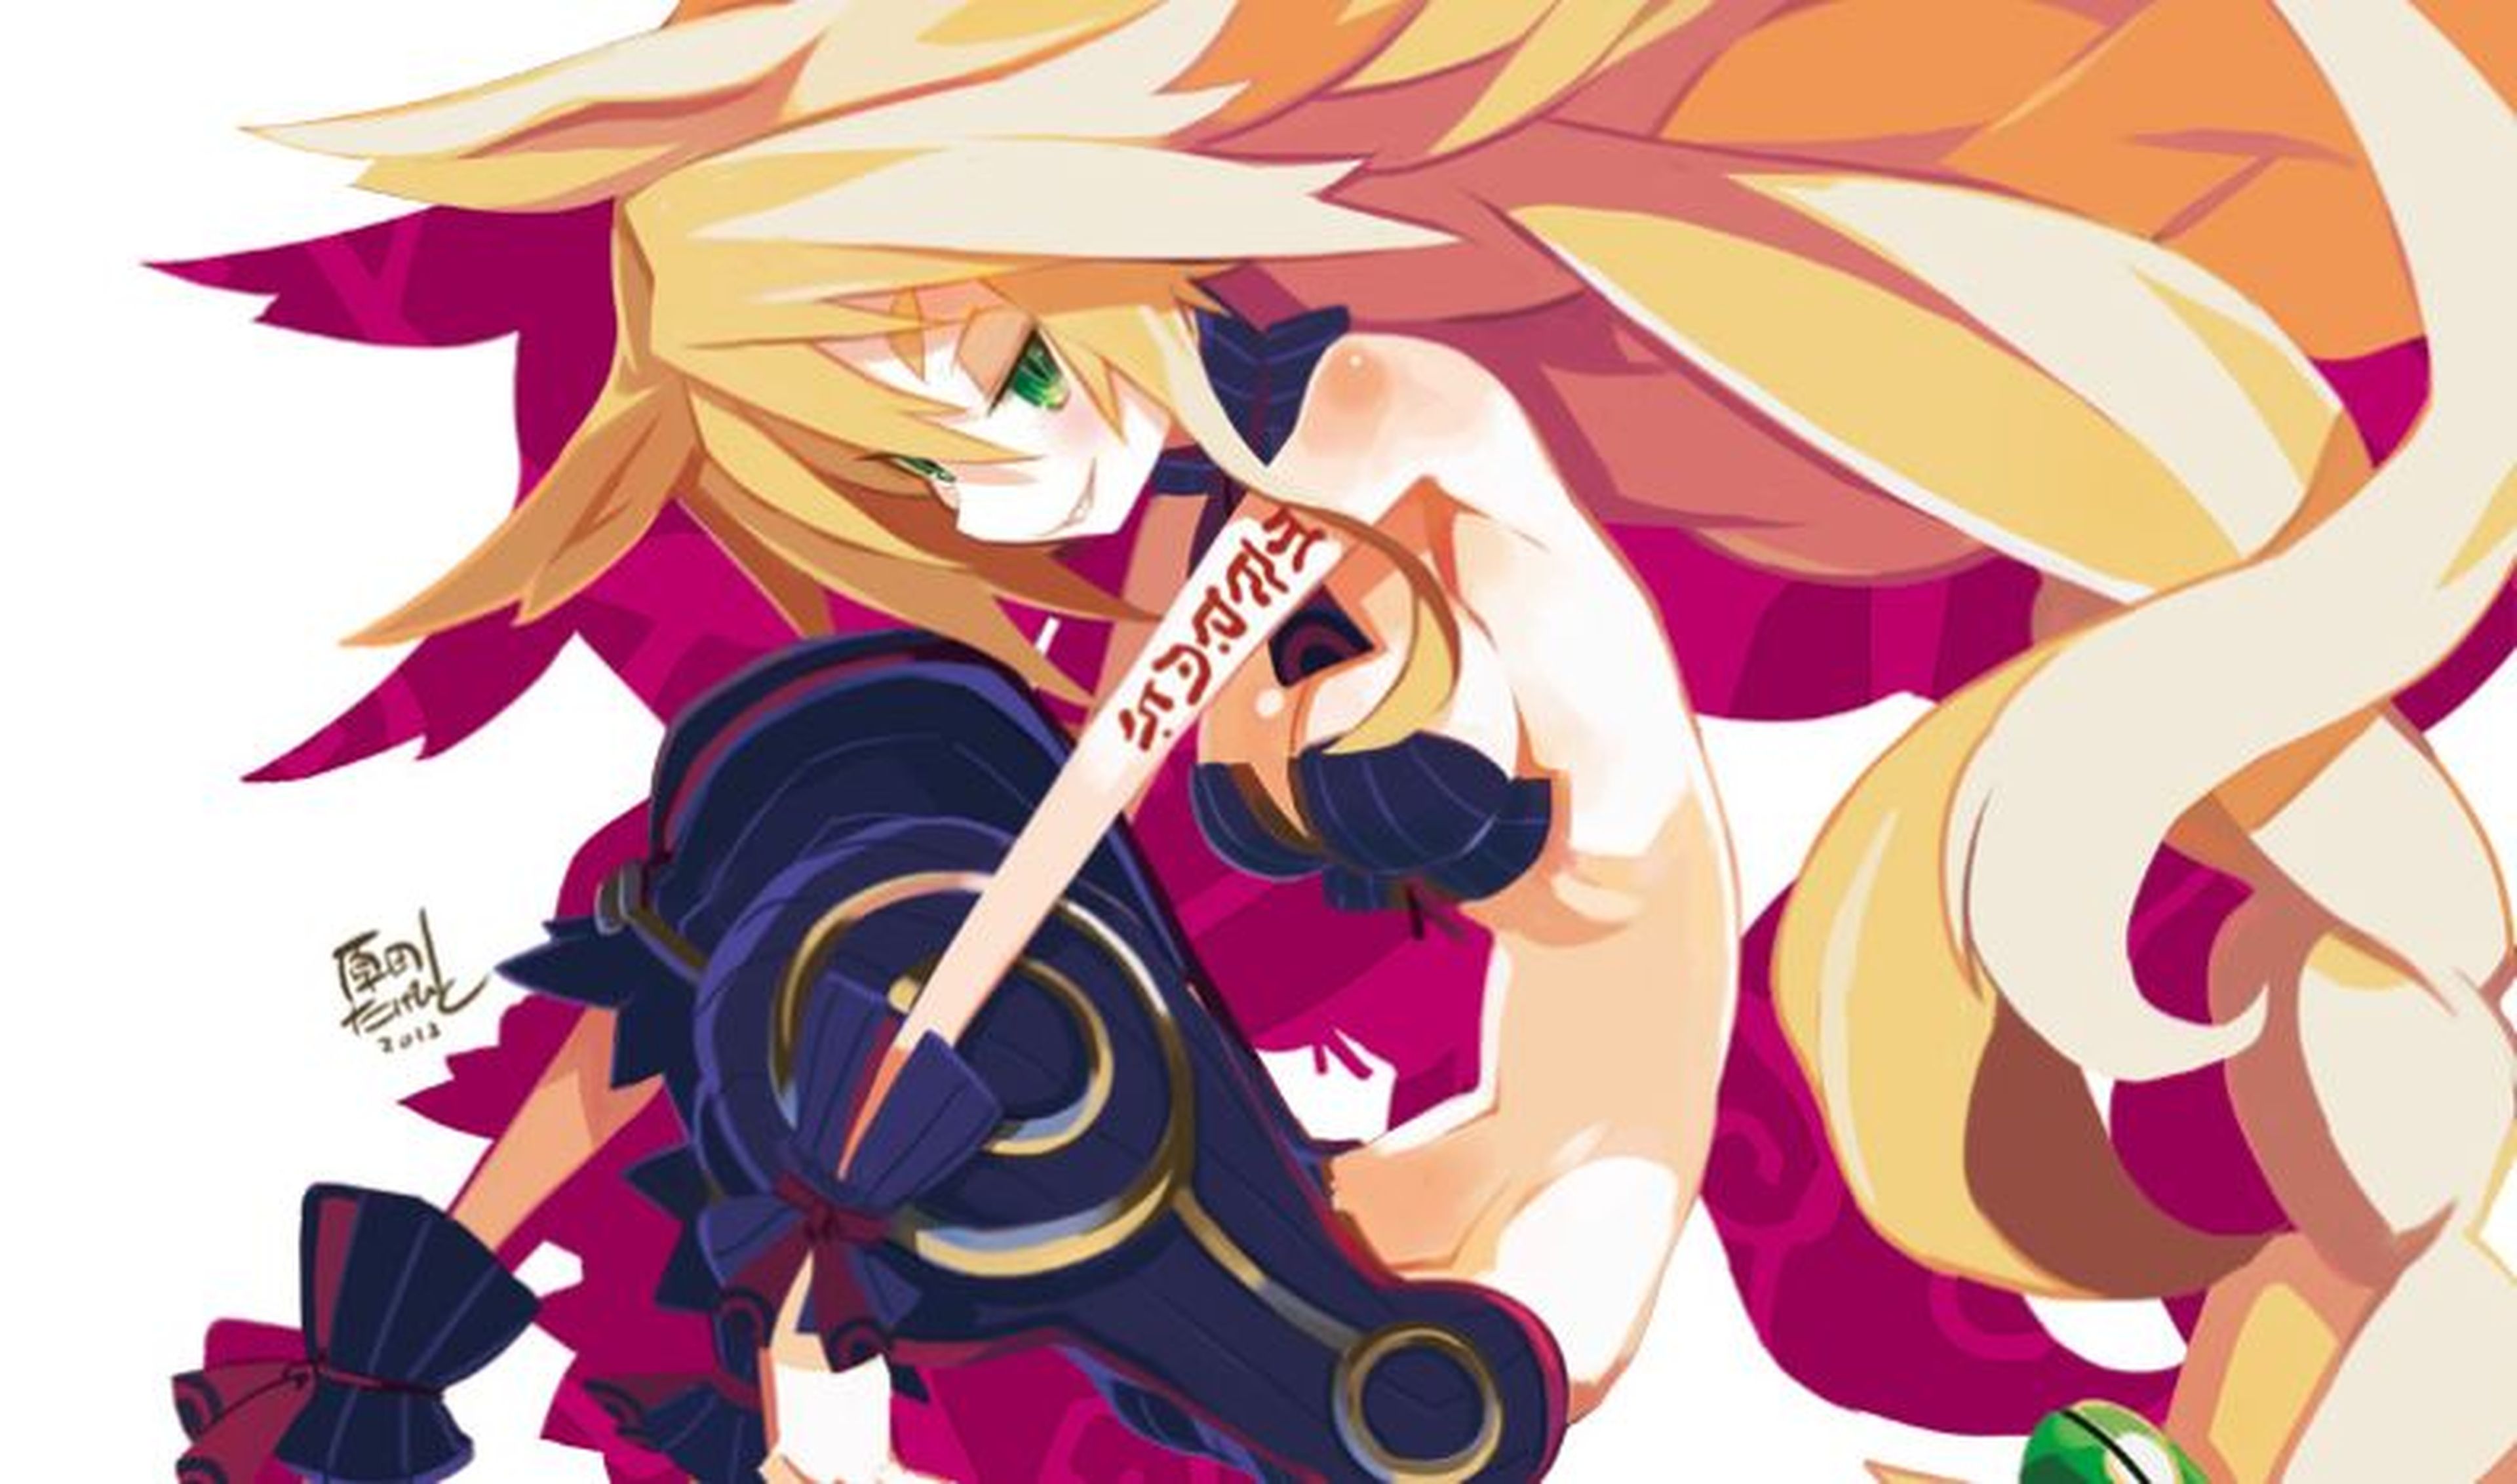 Imágenes y gameplay de The Witch and the Hundred Knight